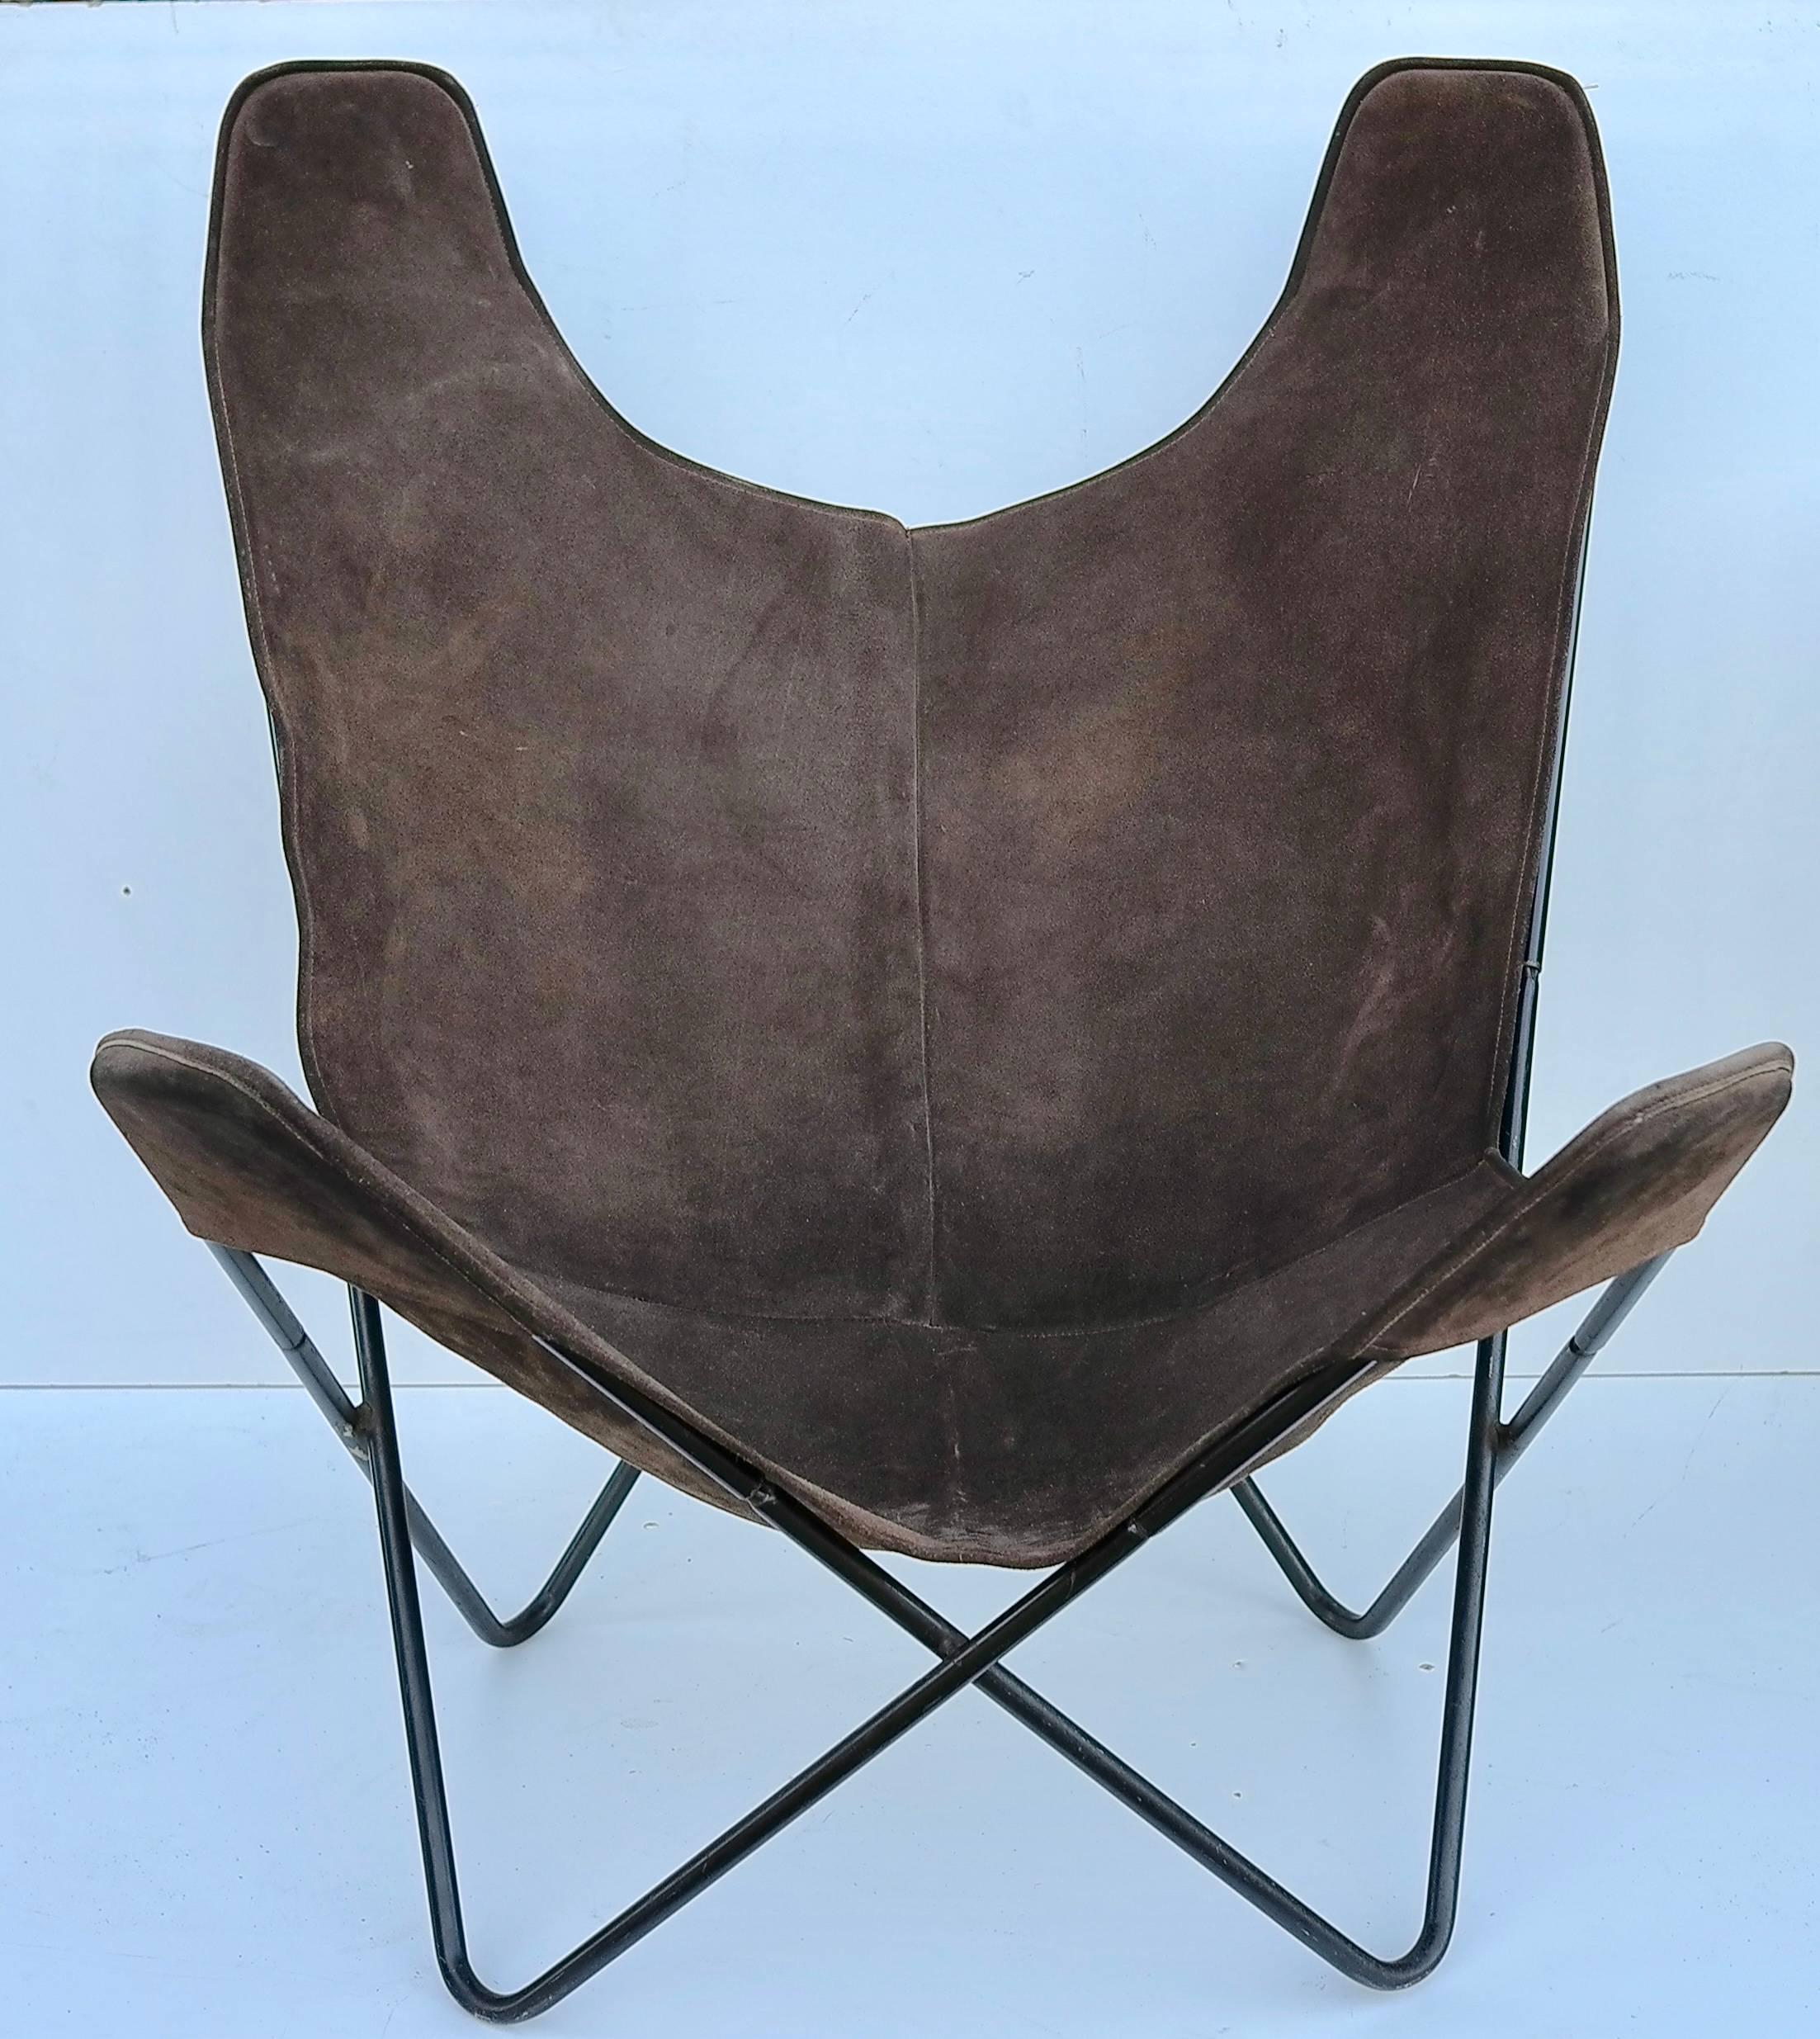 Knoll Butterfly chair by Jorge Ferrari-Hardoy in suede leather. 

Vintage Knoll butterfly chair. Designer: Jorge Ferrari-Hardoy for Knoll. Designed by Jorge Ferrari-Hardoy in 1938. This butterfly chair was the official licensed release by Knoll